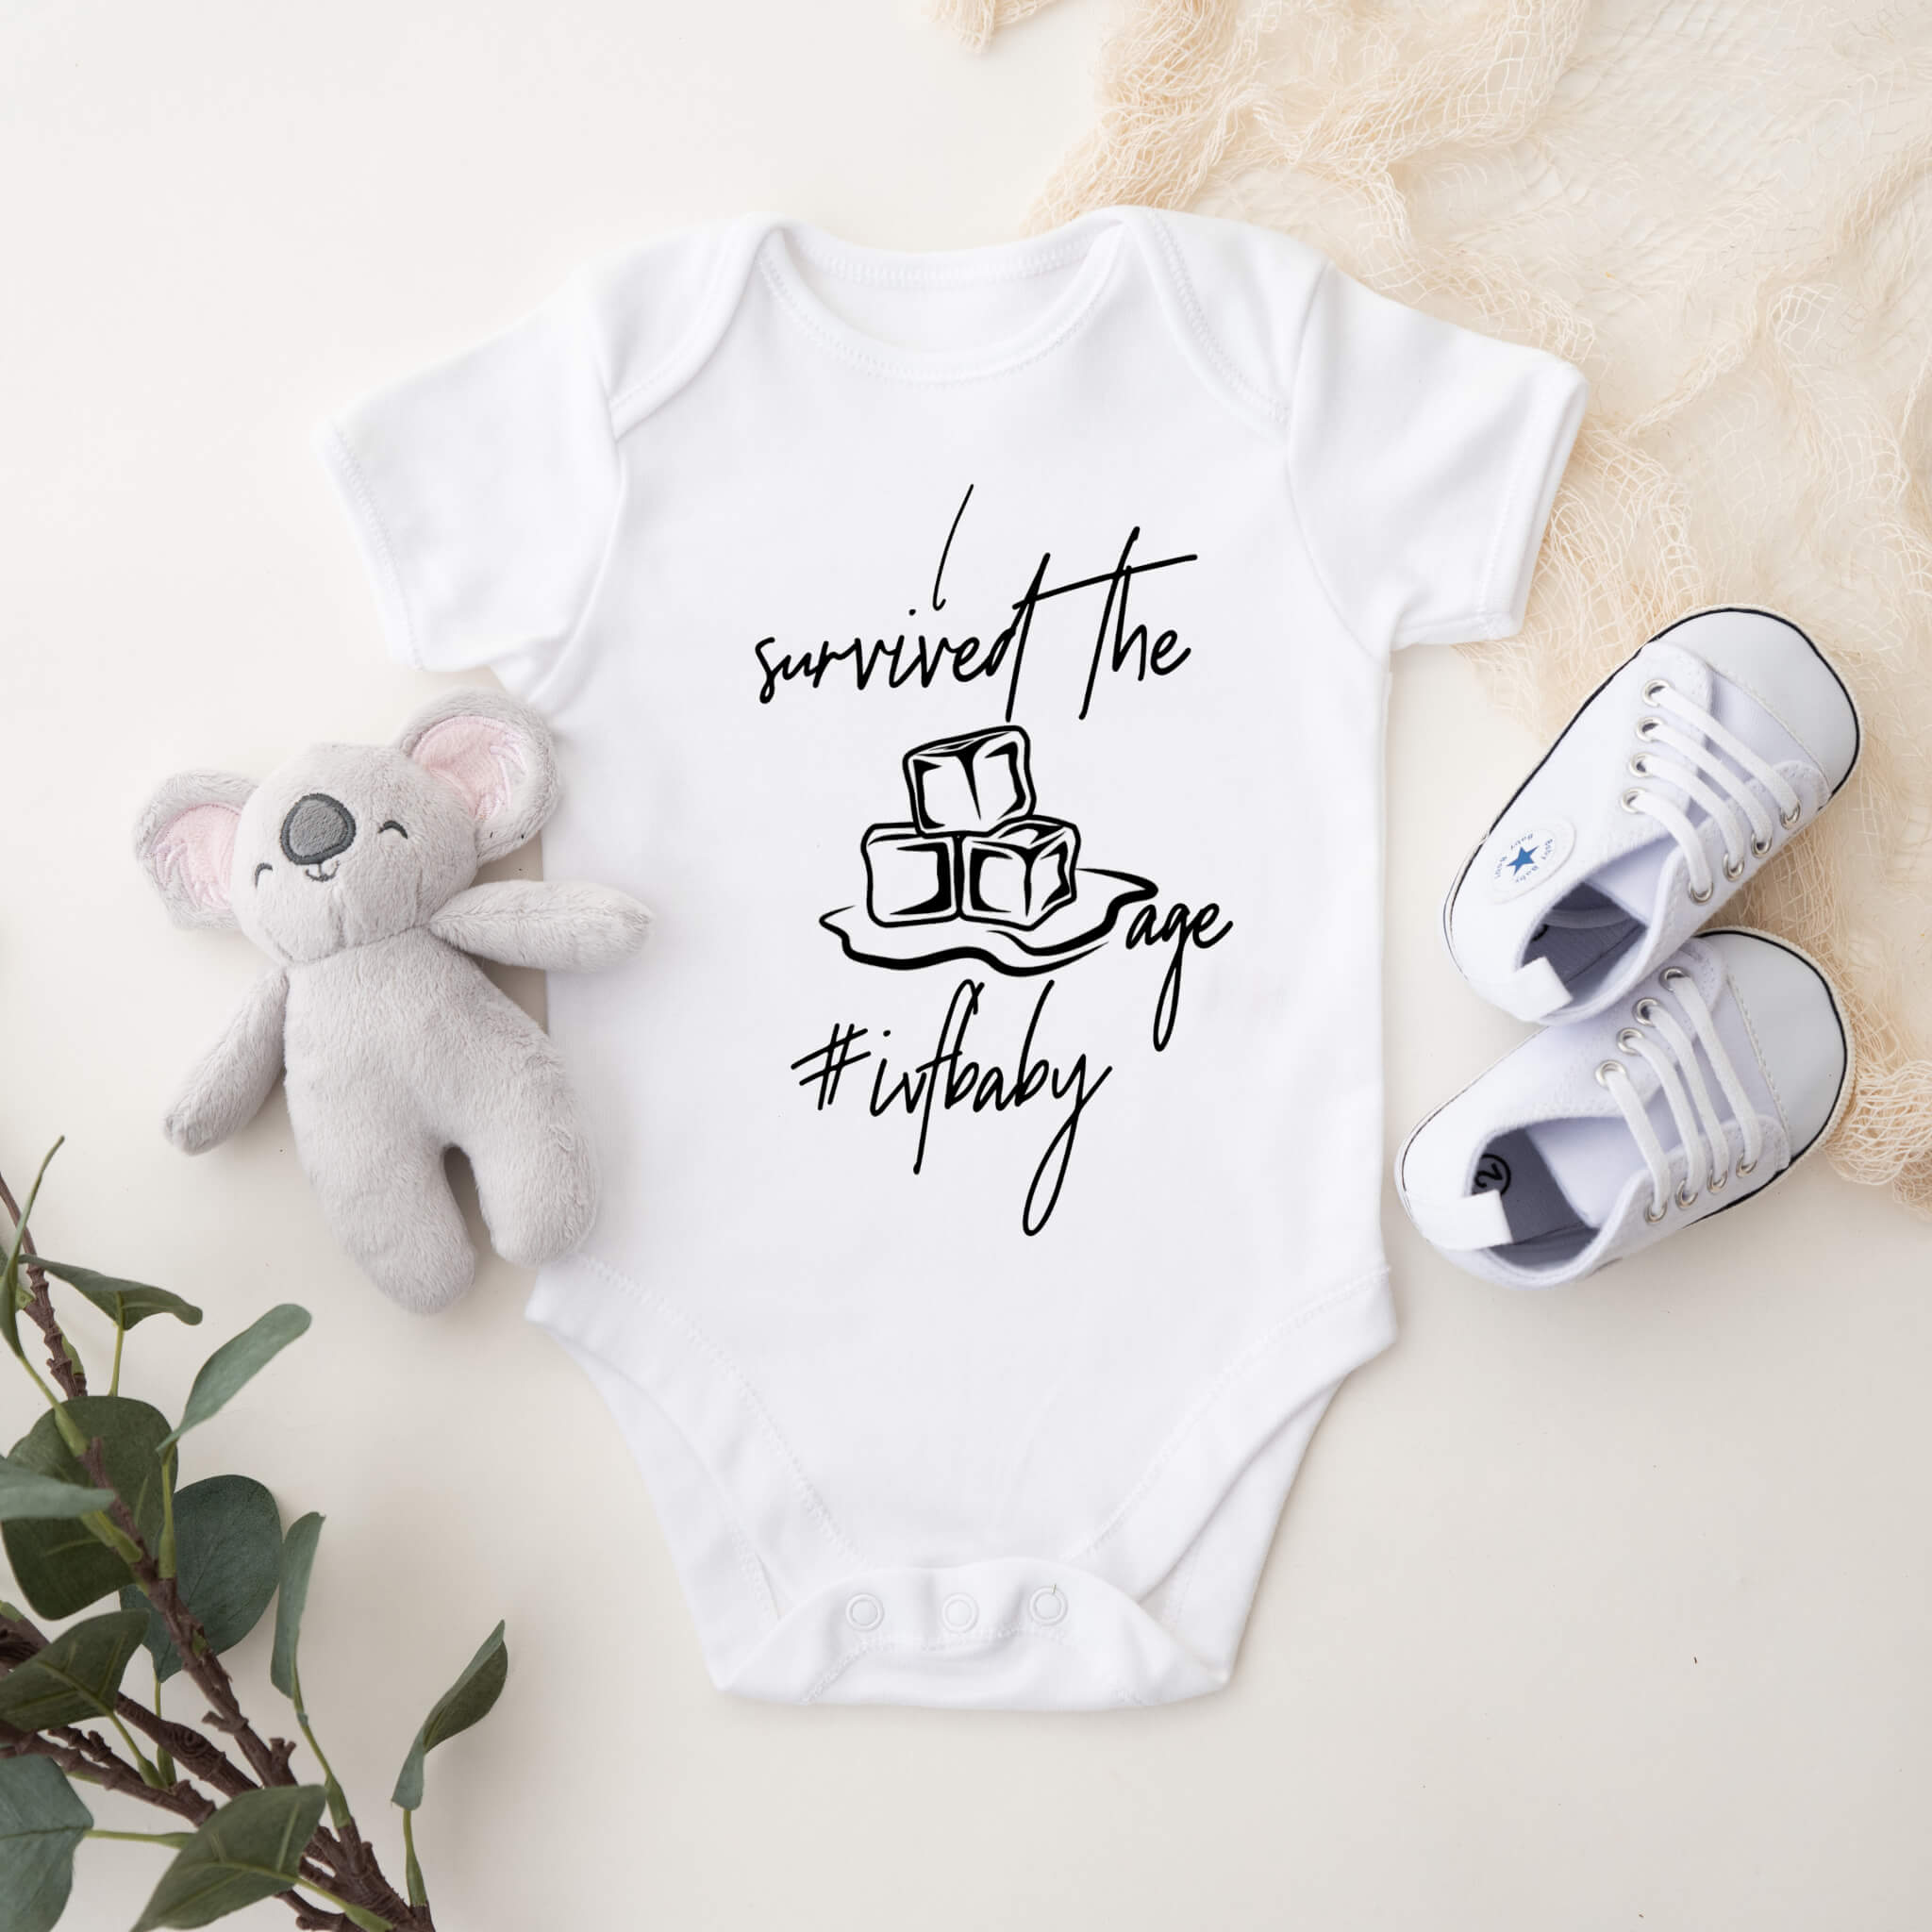 Personalized Pregnancy Announcement, IVF I Survived The Ice Age, Dad, Grandma, Grandpa, Auntie, Uncle To Be, Customized Baby Announcement Onesie